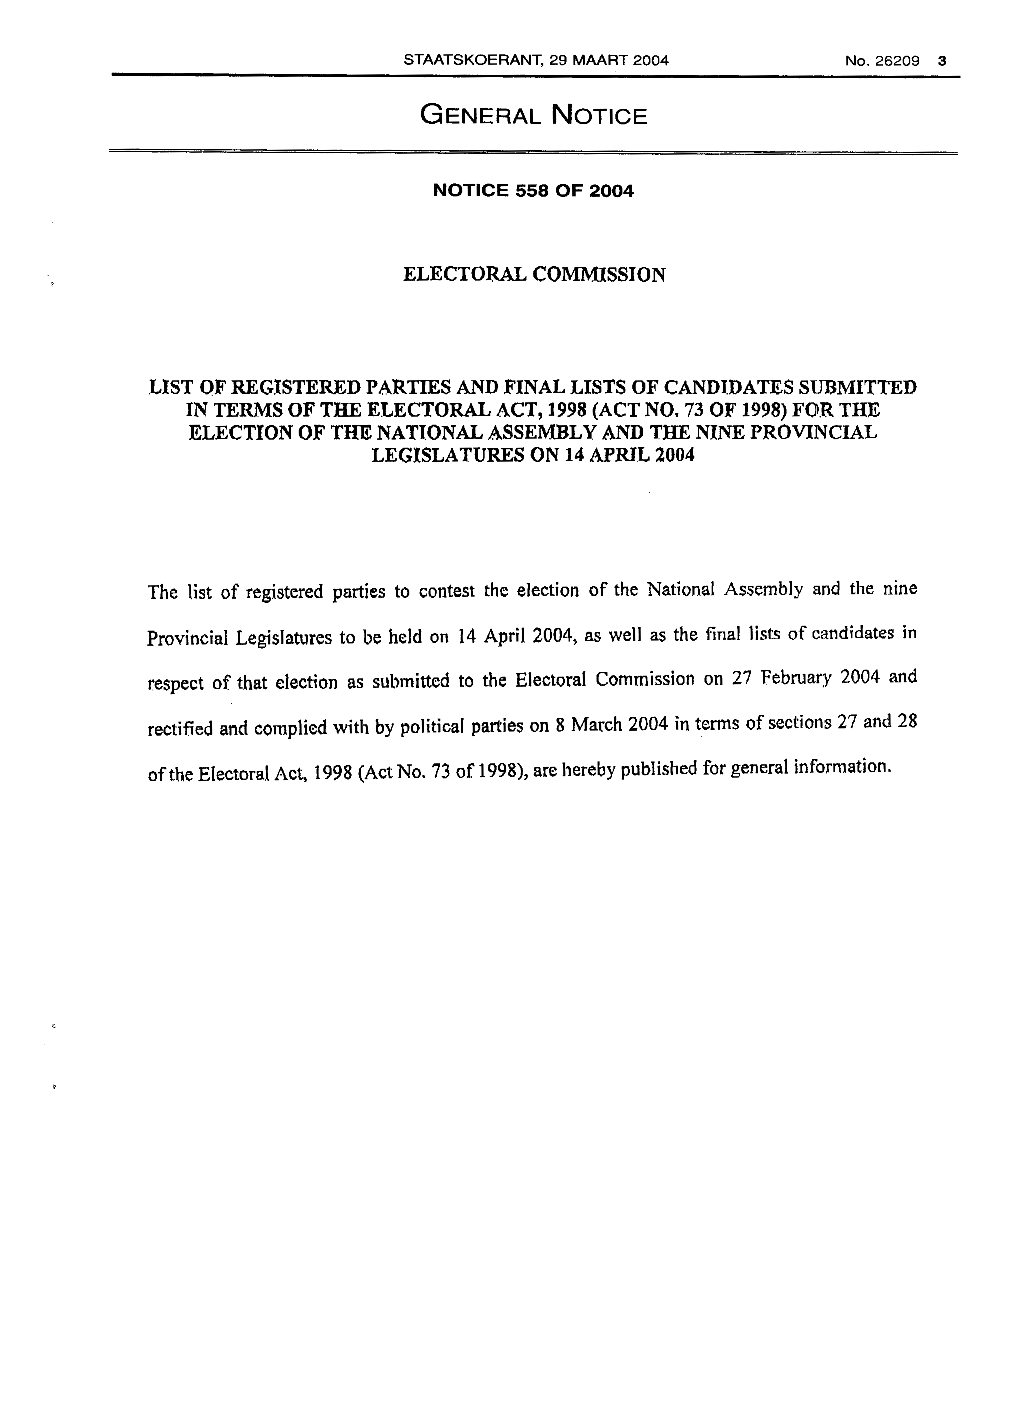 Electoral Act: List of Registered Parties and Final Lists of Candidates